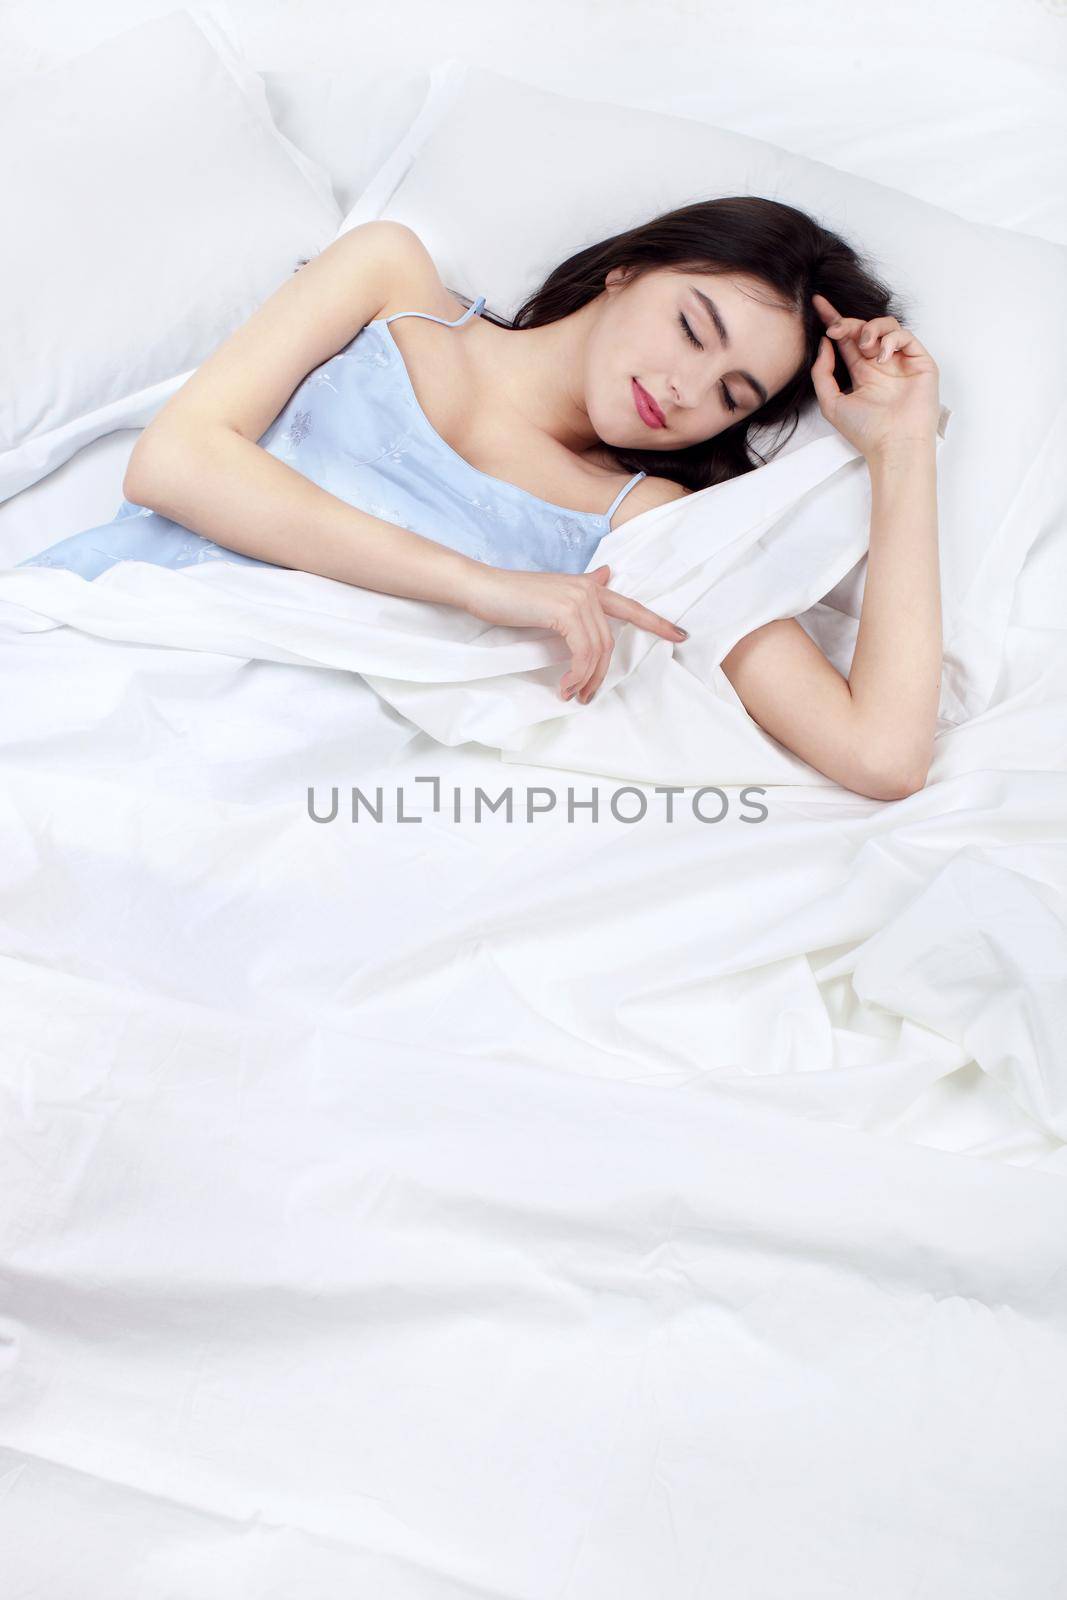 lonely woman in bed missing her partner overhead view of sleeping beauty